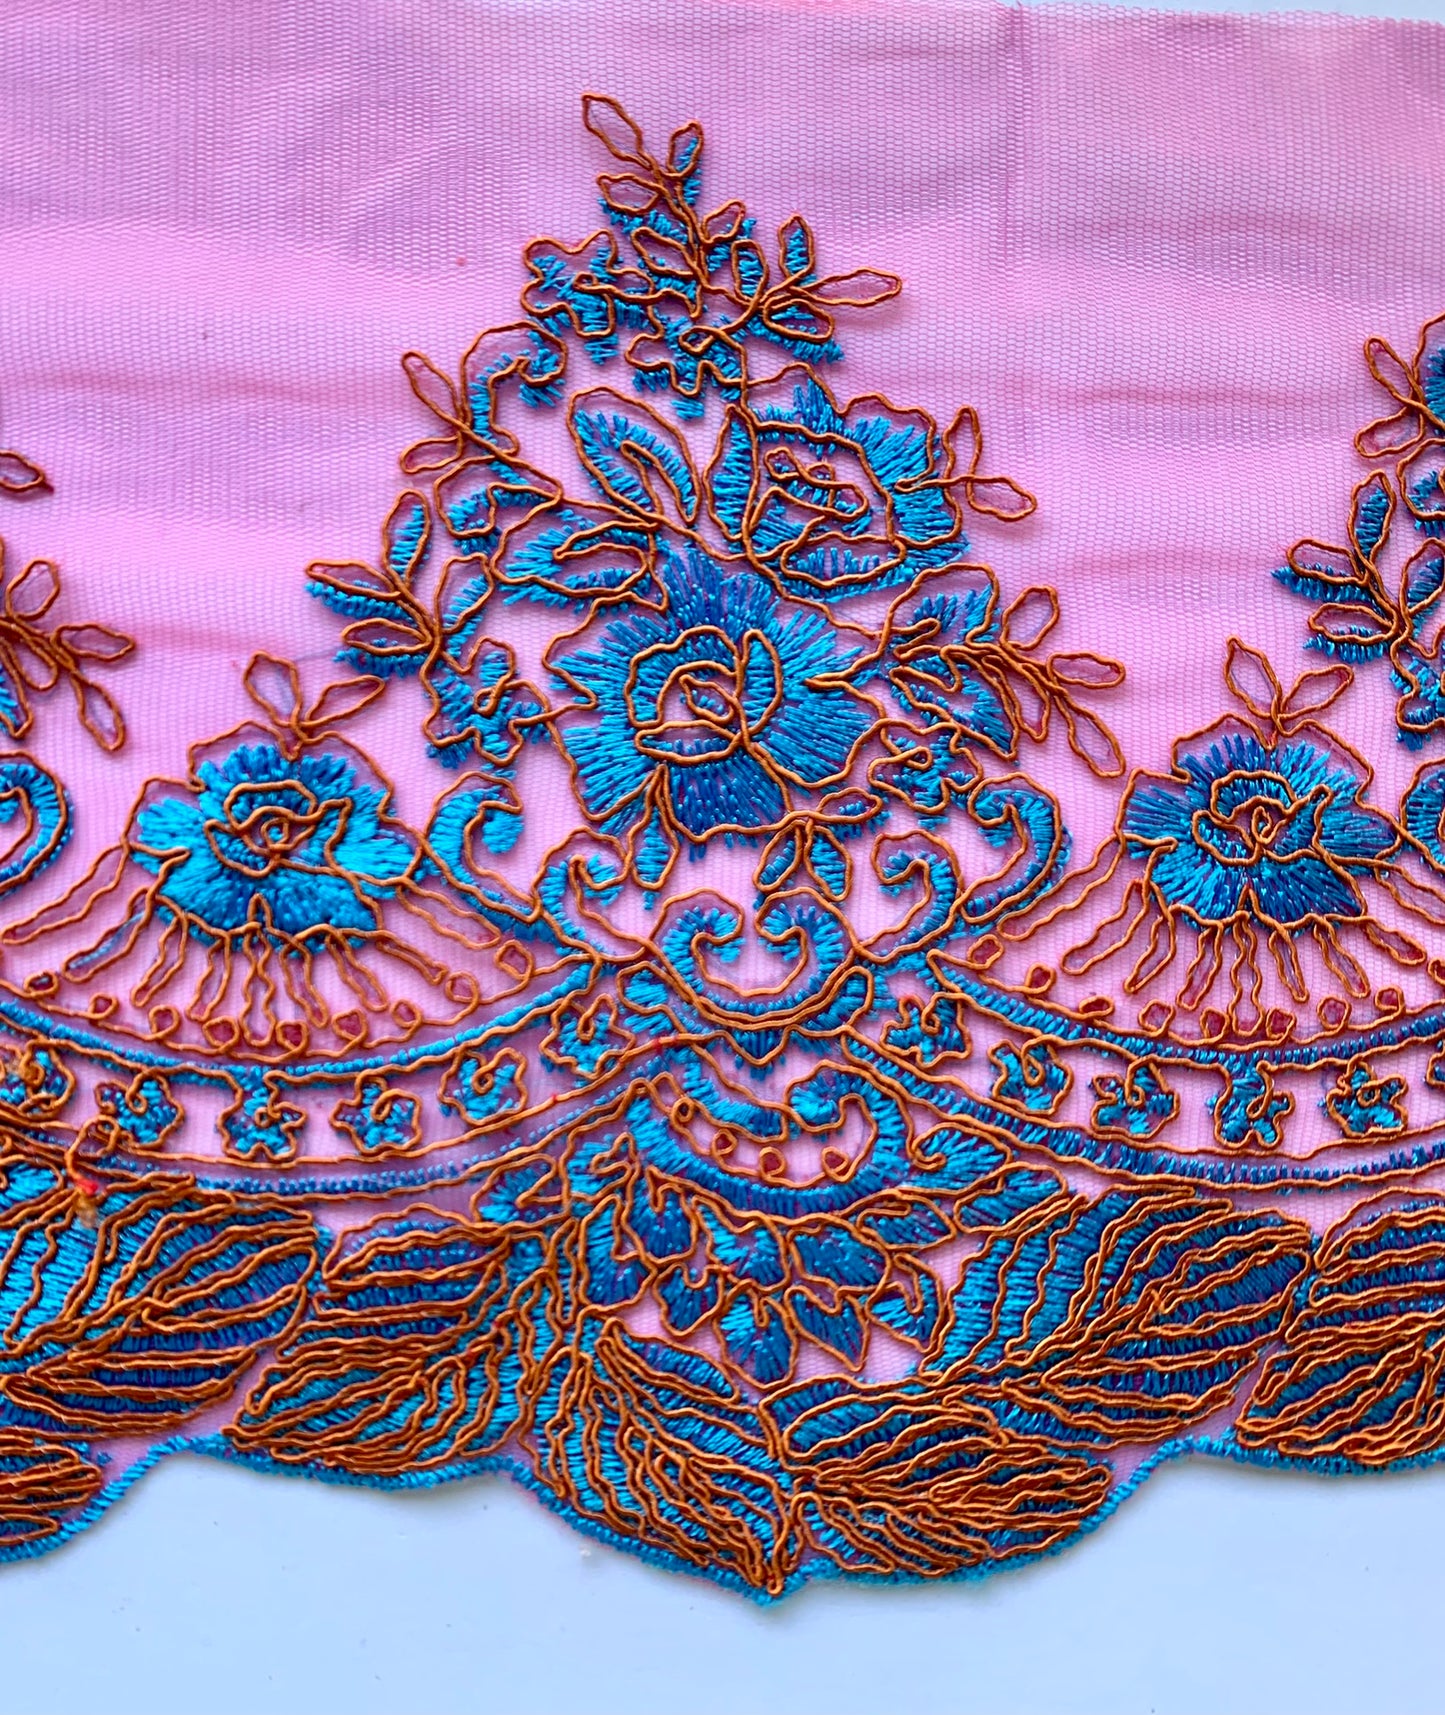 Turquoise and Copper Lace Border Trim - LBT#40